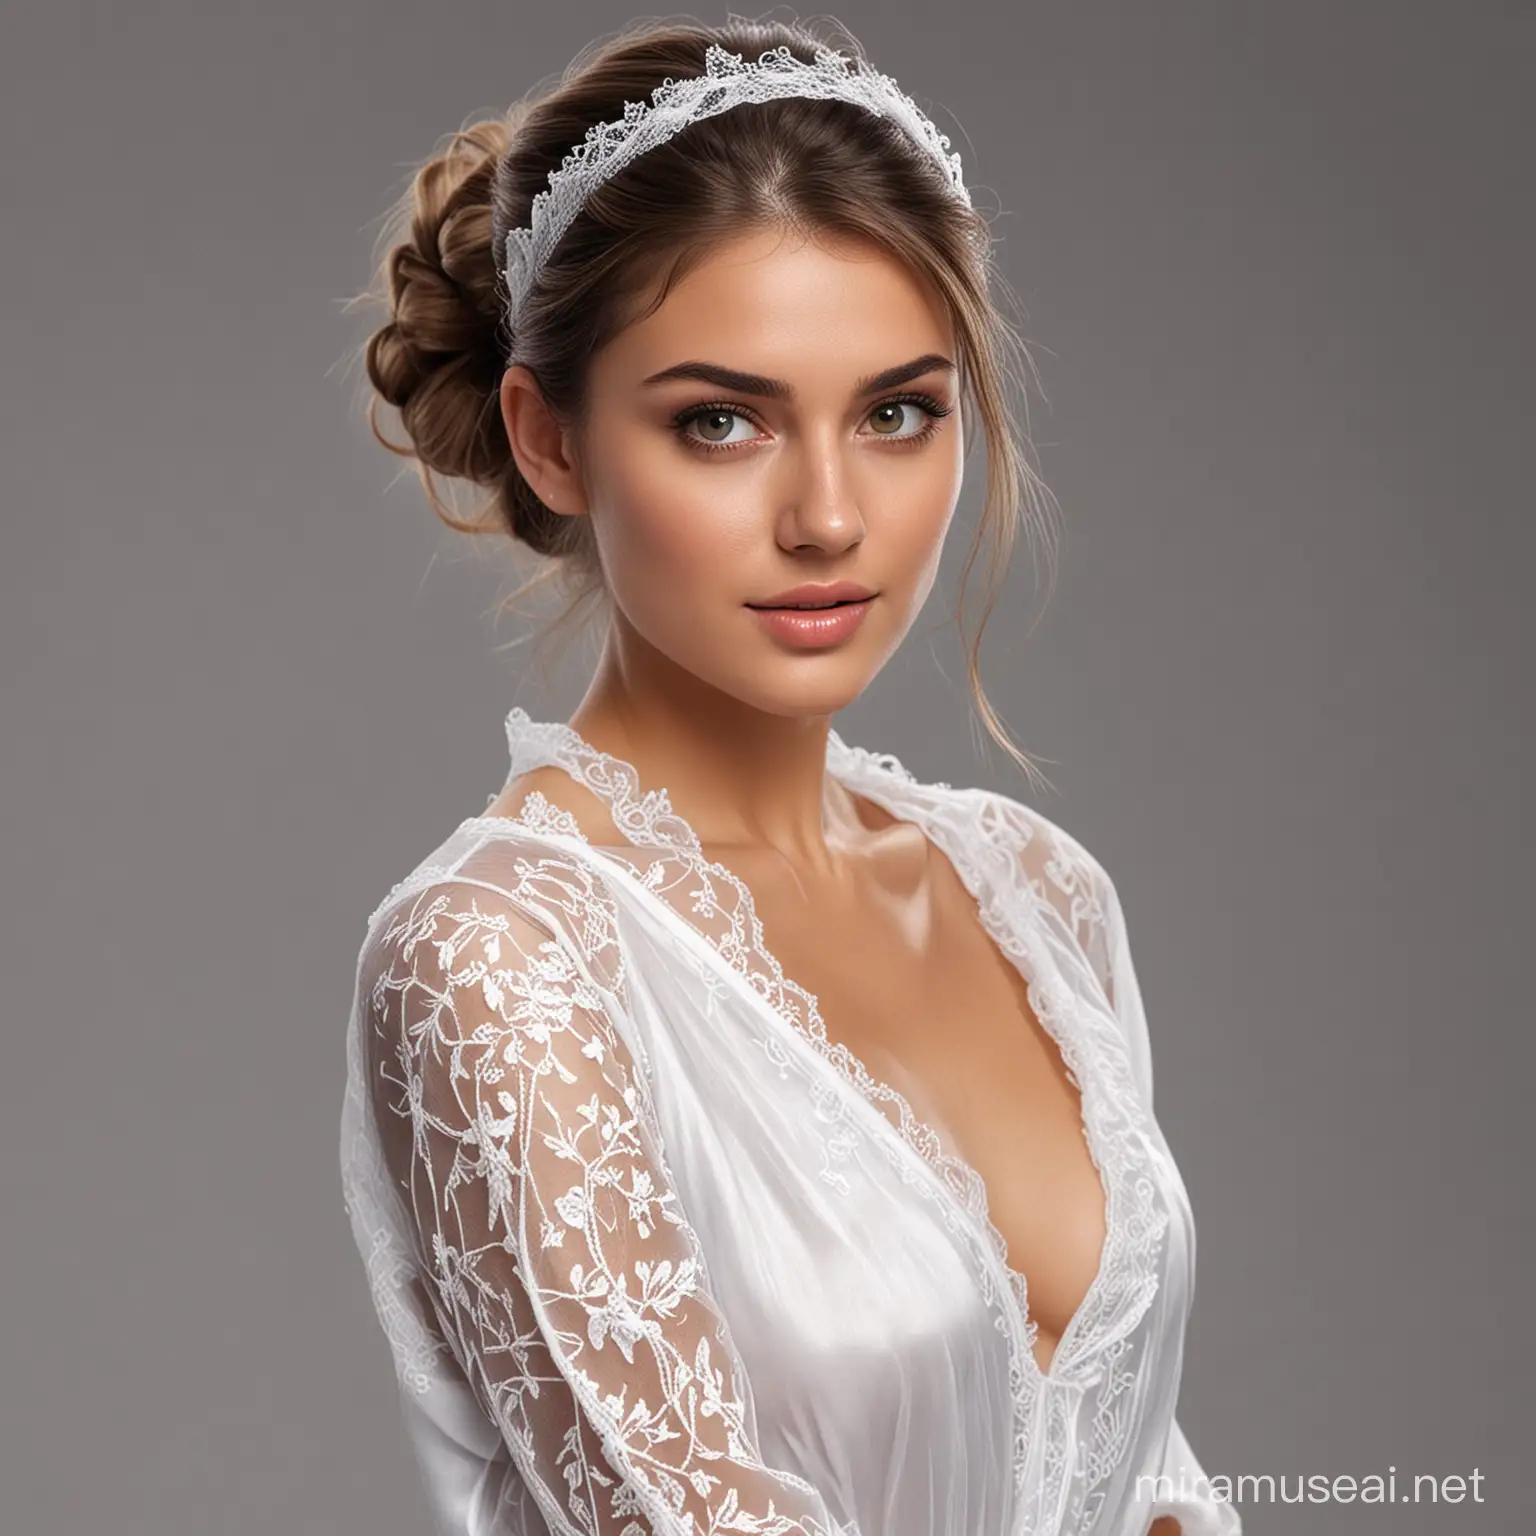 Elegant Woman in Sheer Lace Nightgown